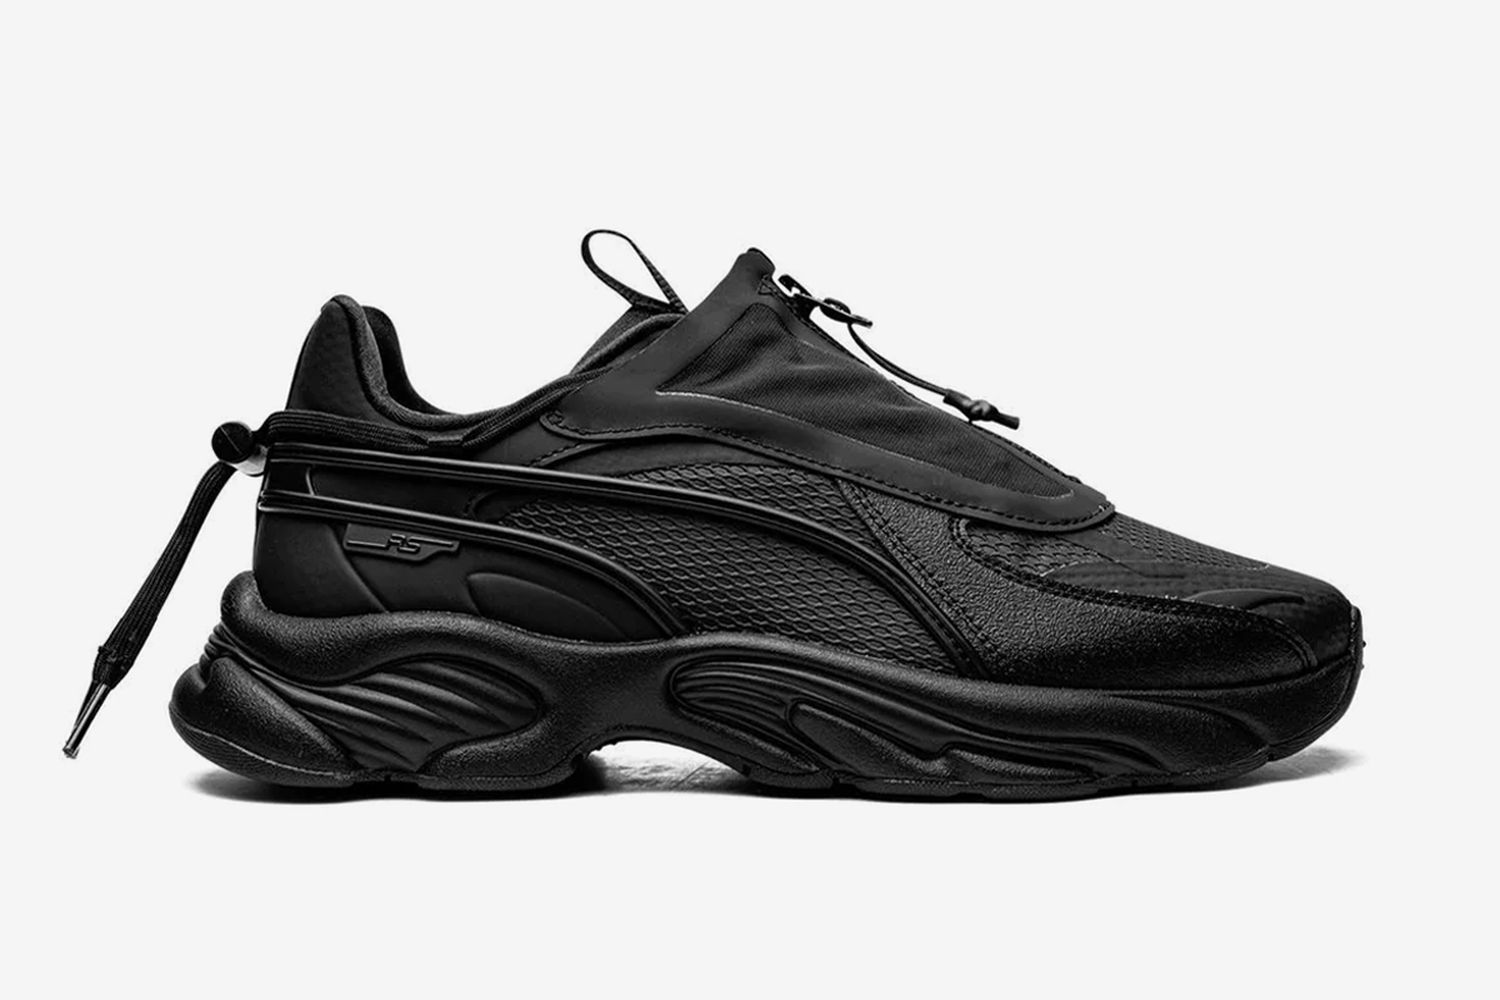 14 of the Best PUMA Sneakers to Buy in 2022